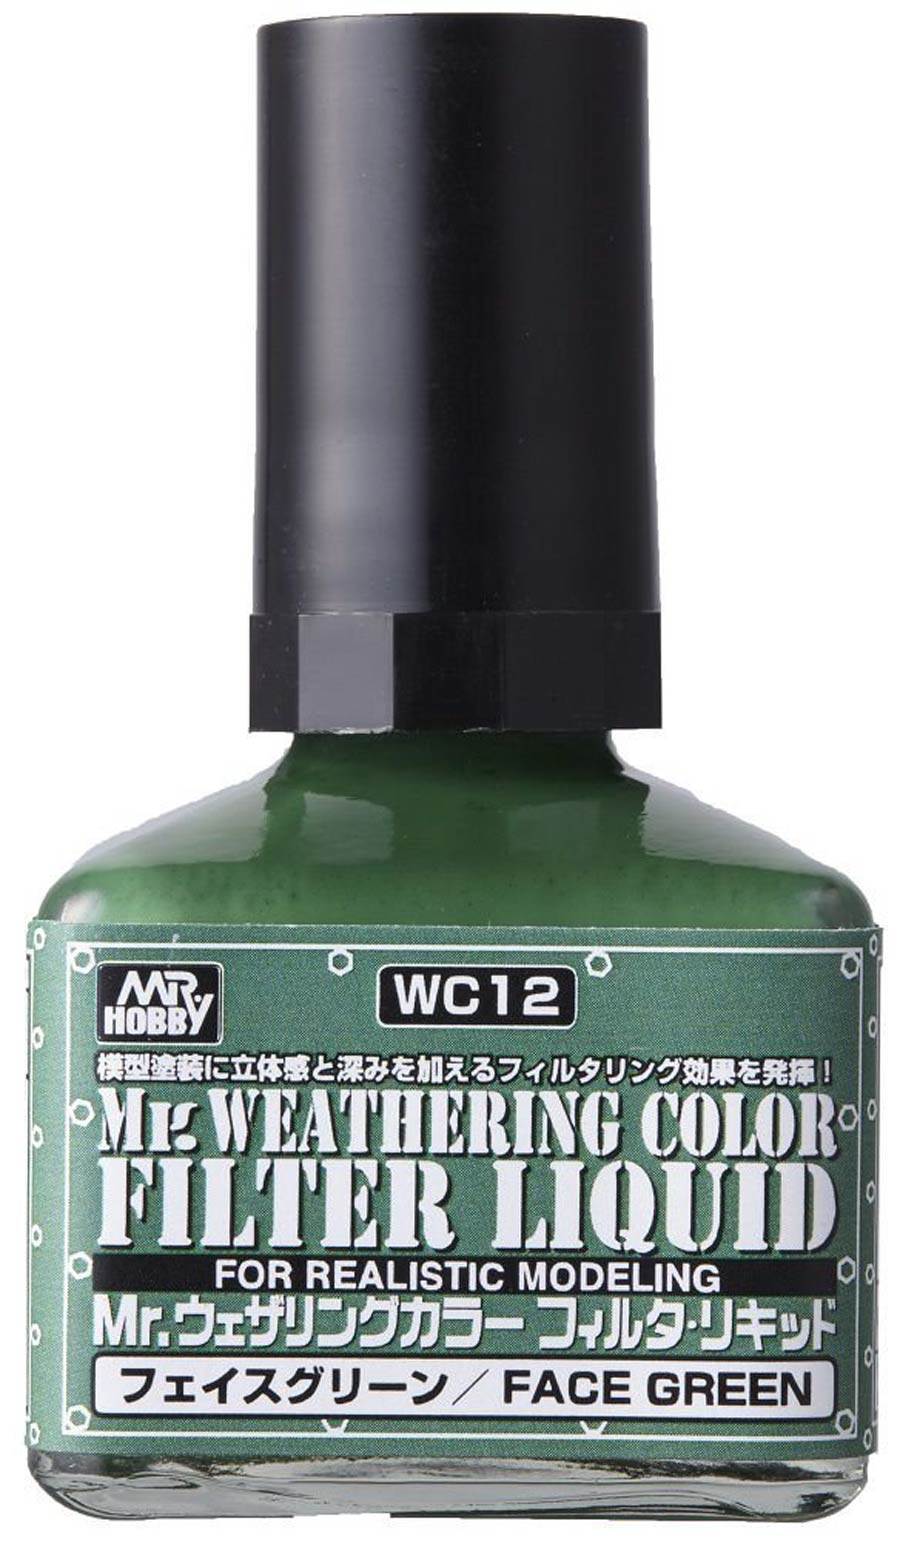 Mr. Weathering Color Paint -  Box Of 6 Units - WC12 Filter Liquid Face Green Bottle